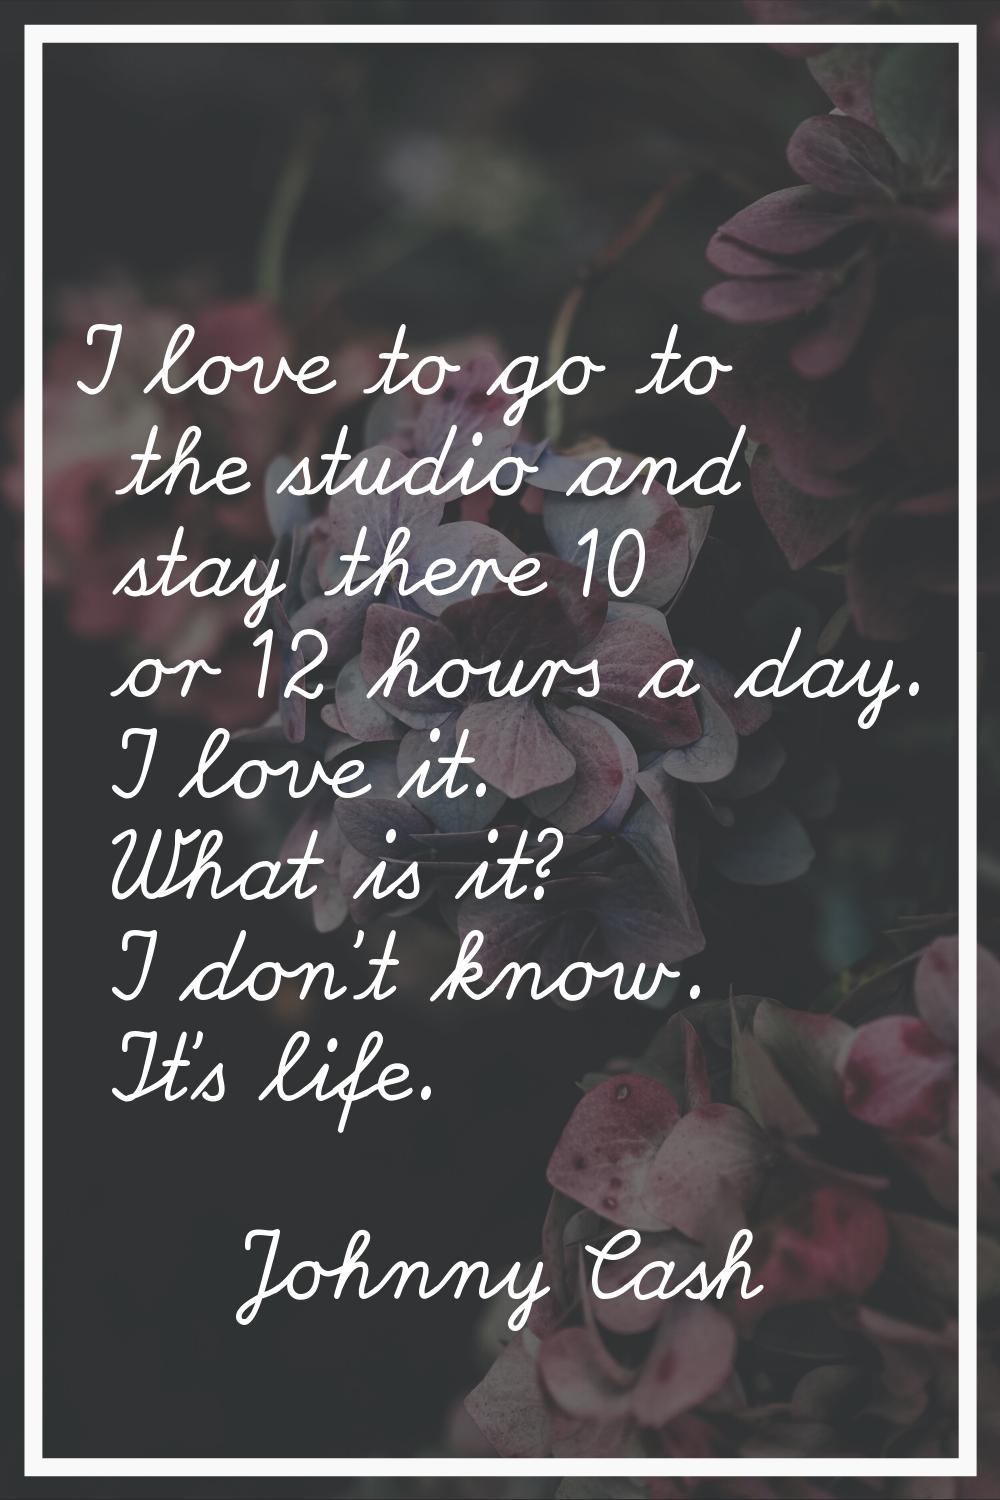 I love to go to the studio and stay there 10 or 12 hours a day. I love it. What is it? I don't know